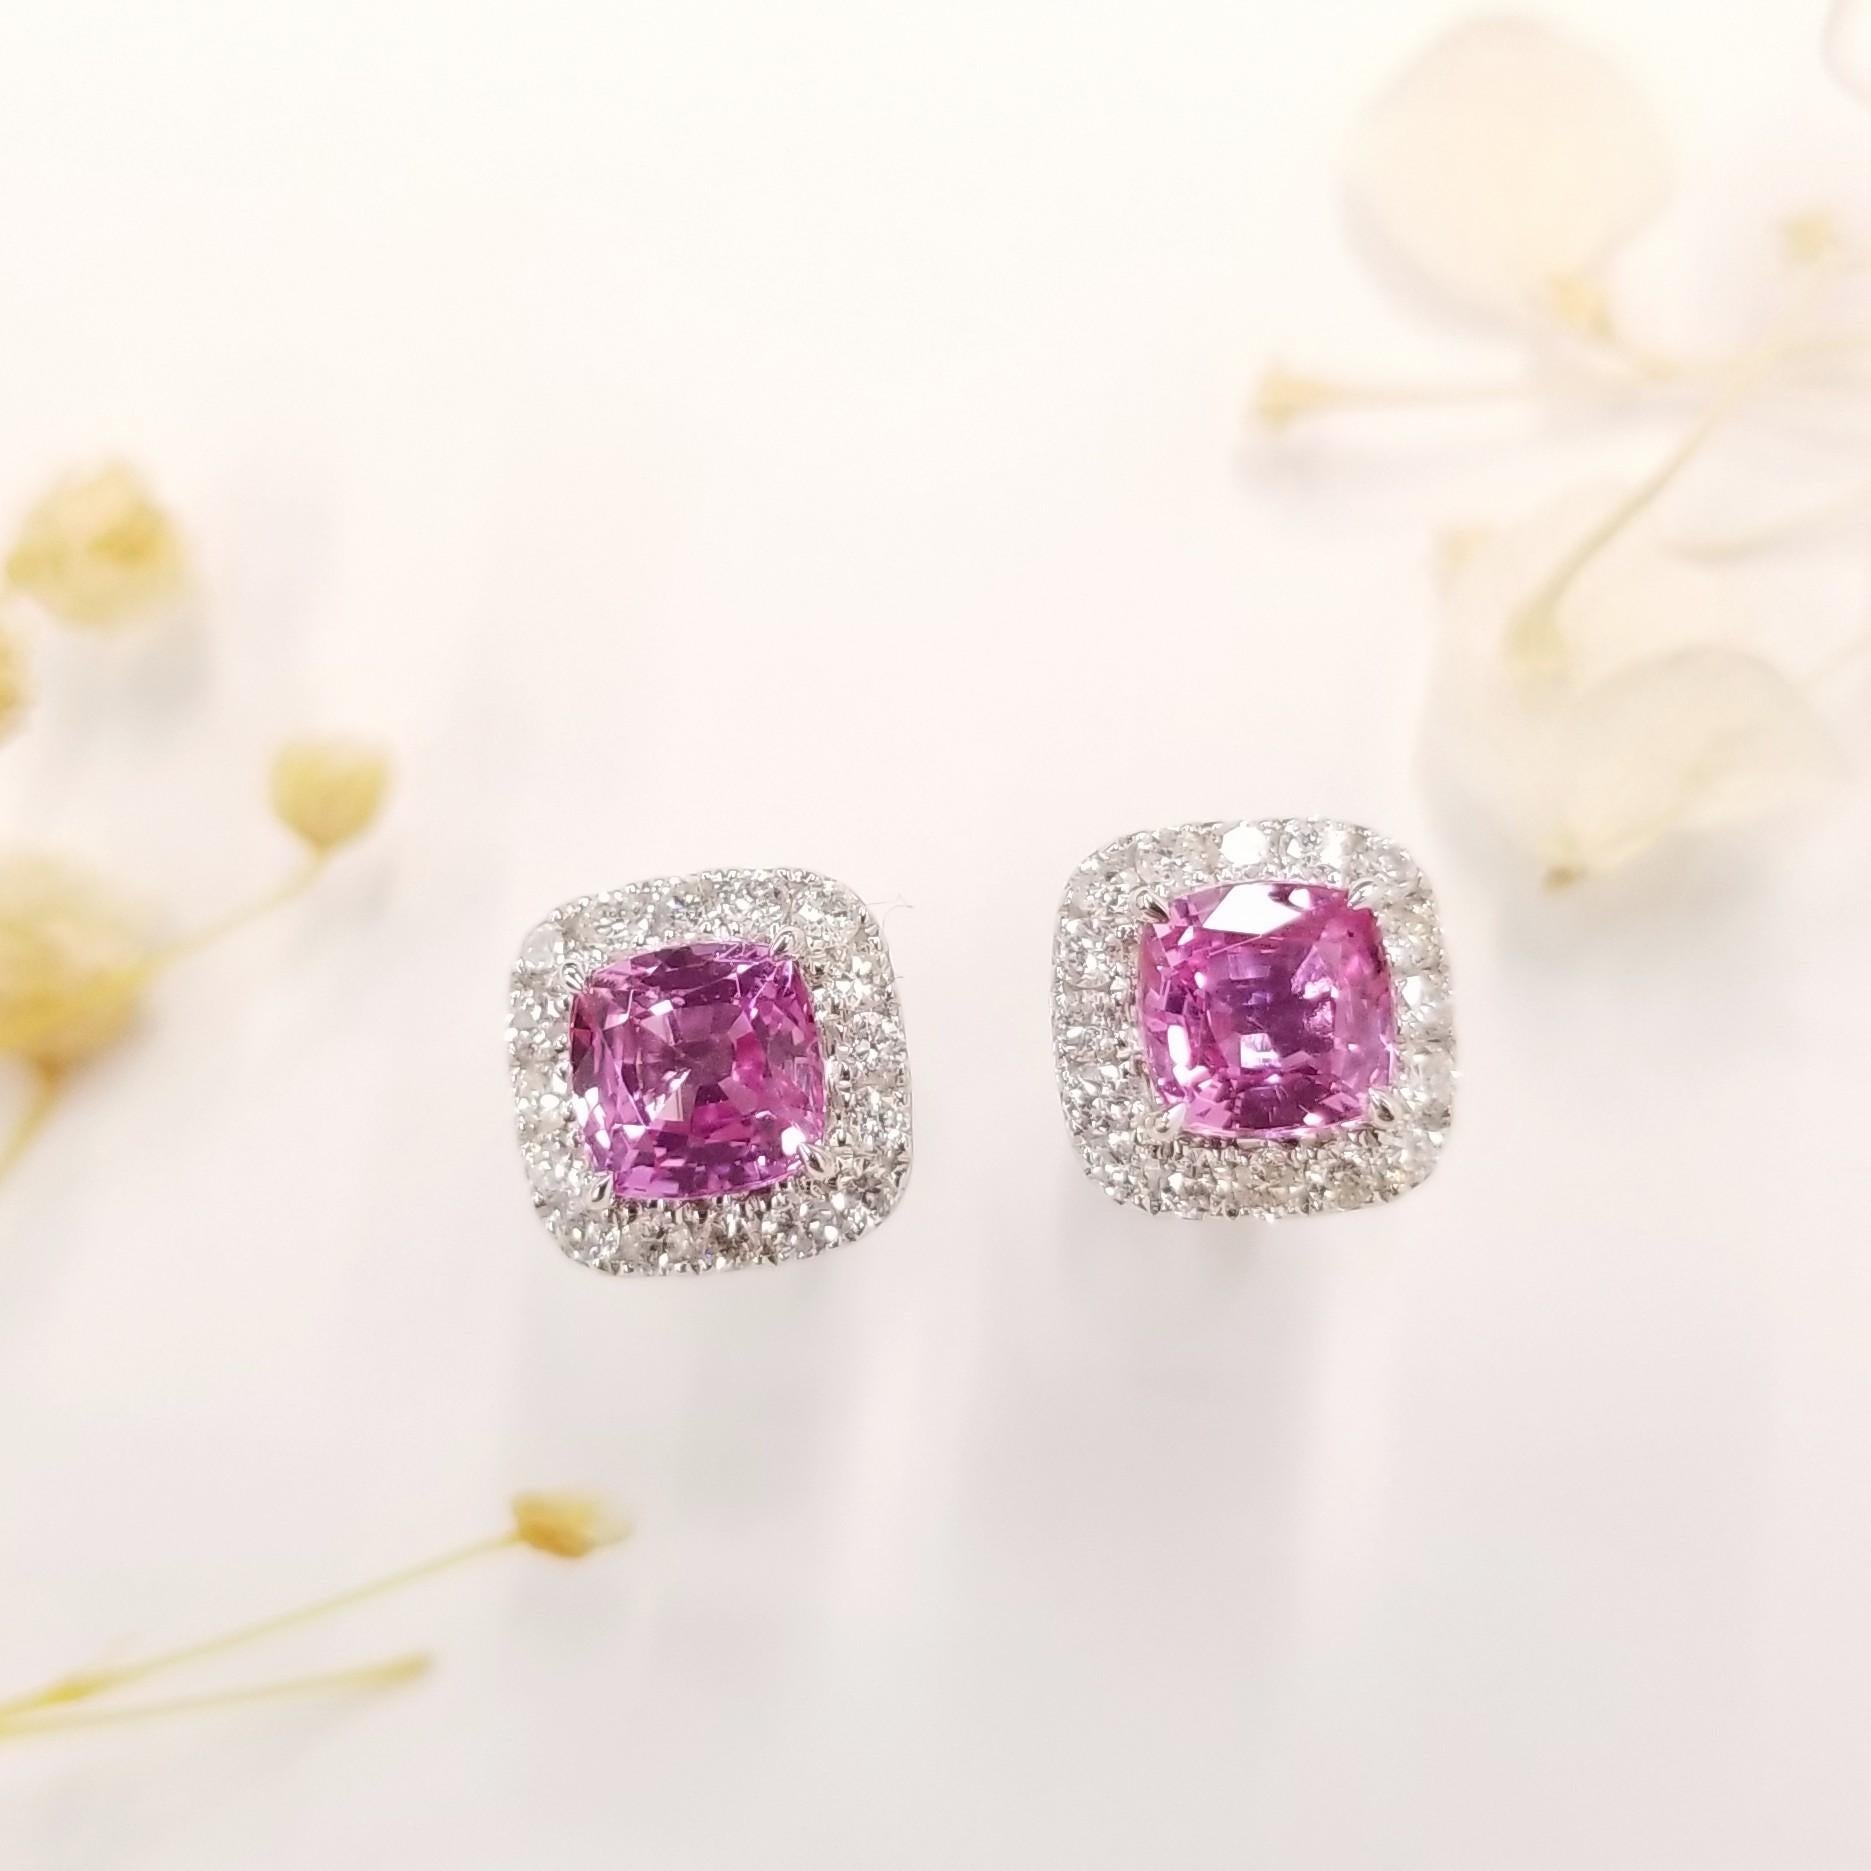 Crafted with meticulous attention to detail, these earrings feature two exquisite pink sapphires, each weighing approximately 0.89 carats. The pink sapphires showcase a vibrant and alluring hue, adding a touch of femininity and grace to the overall